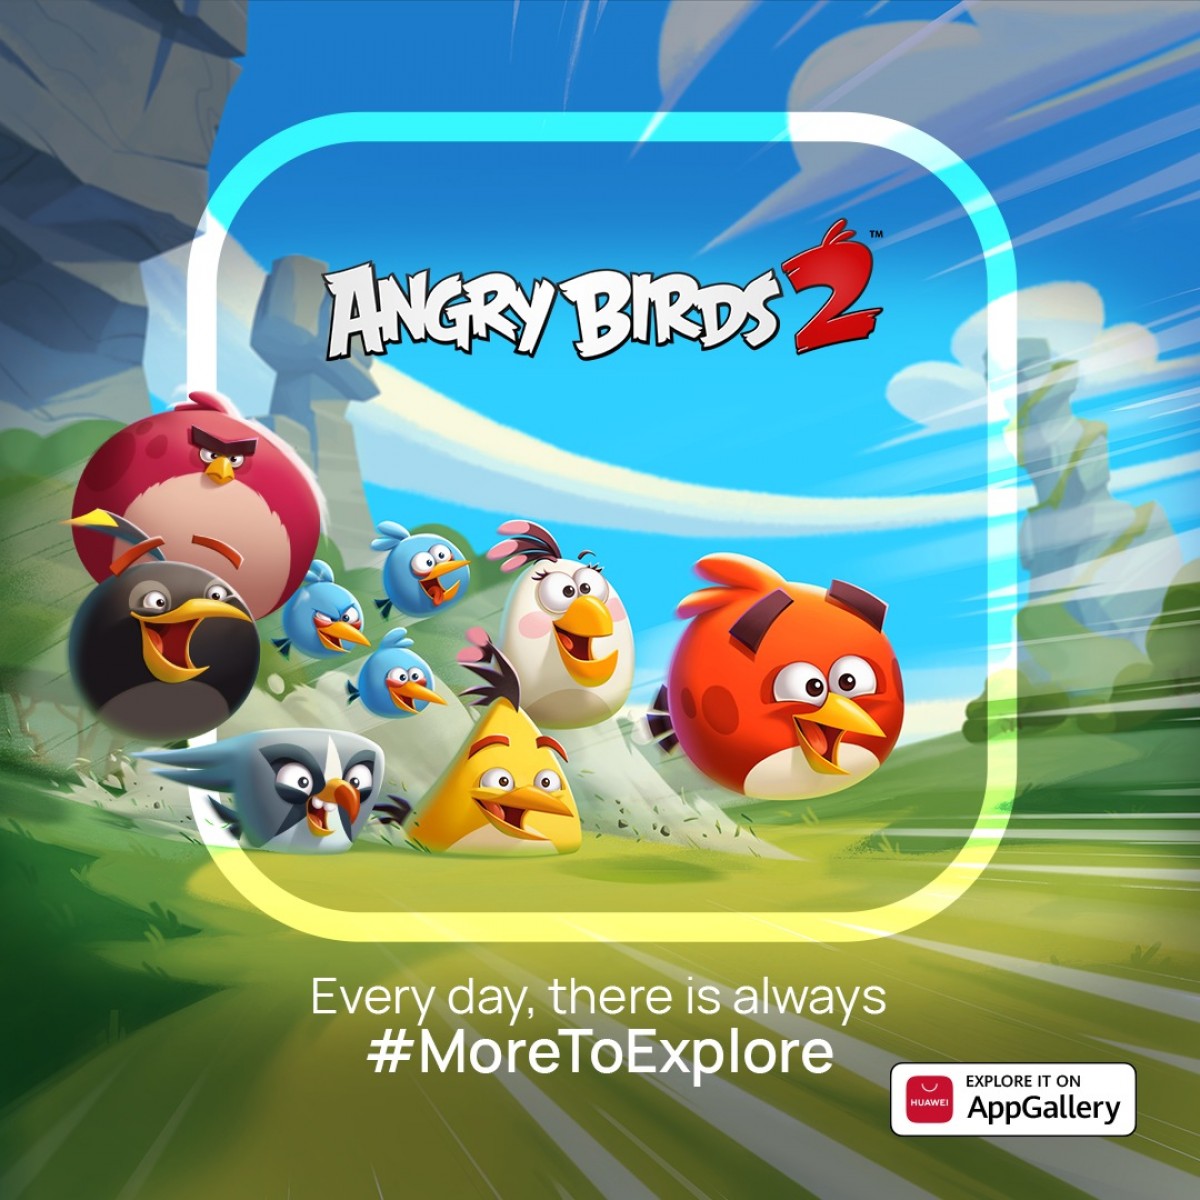 Huawei and Rovio bring Angry Birds 2 to AppGallery